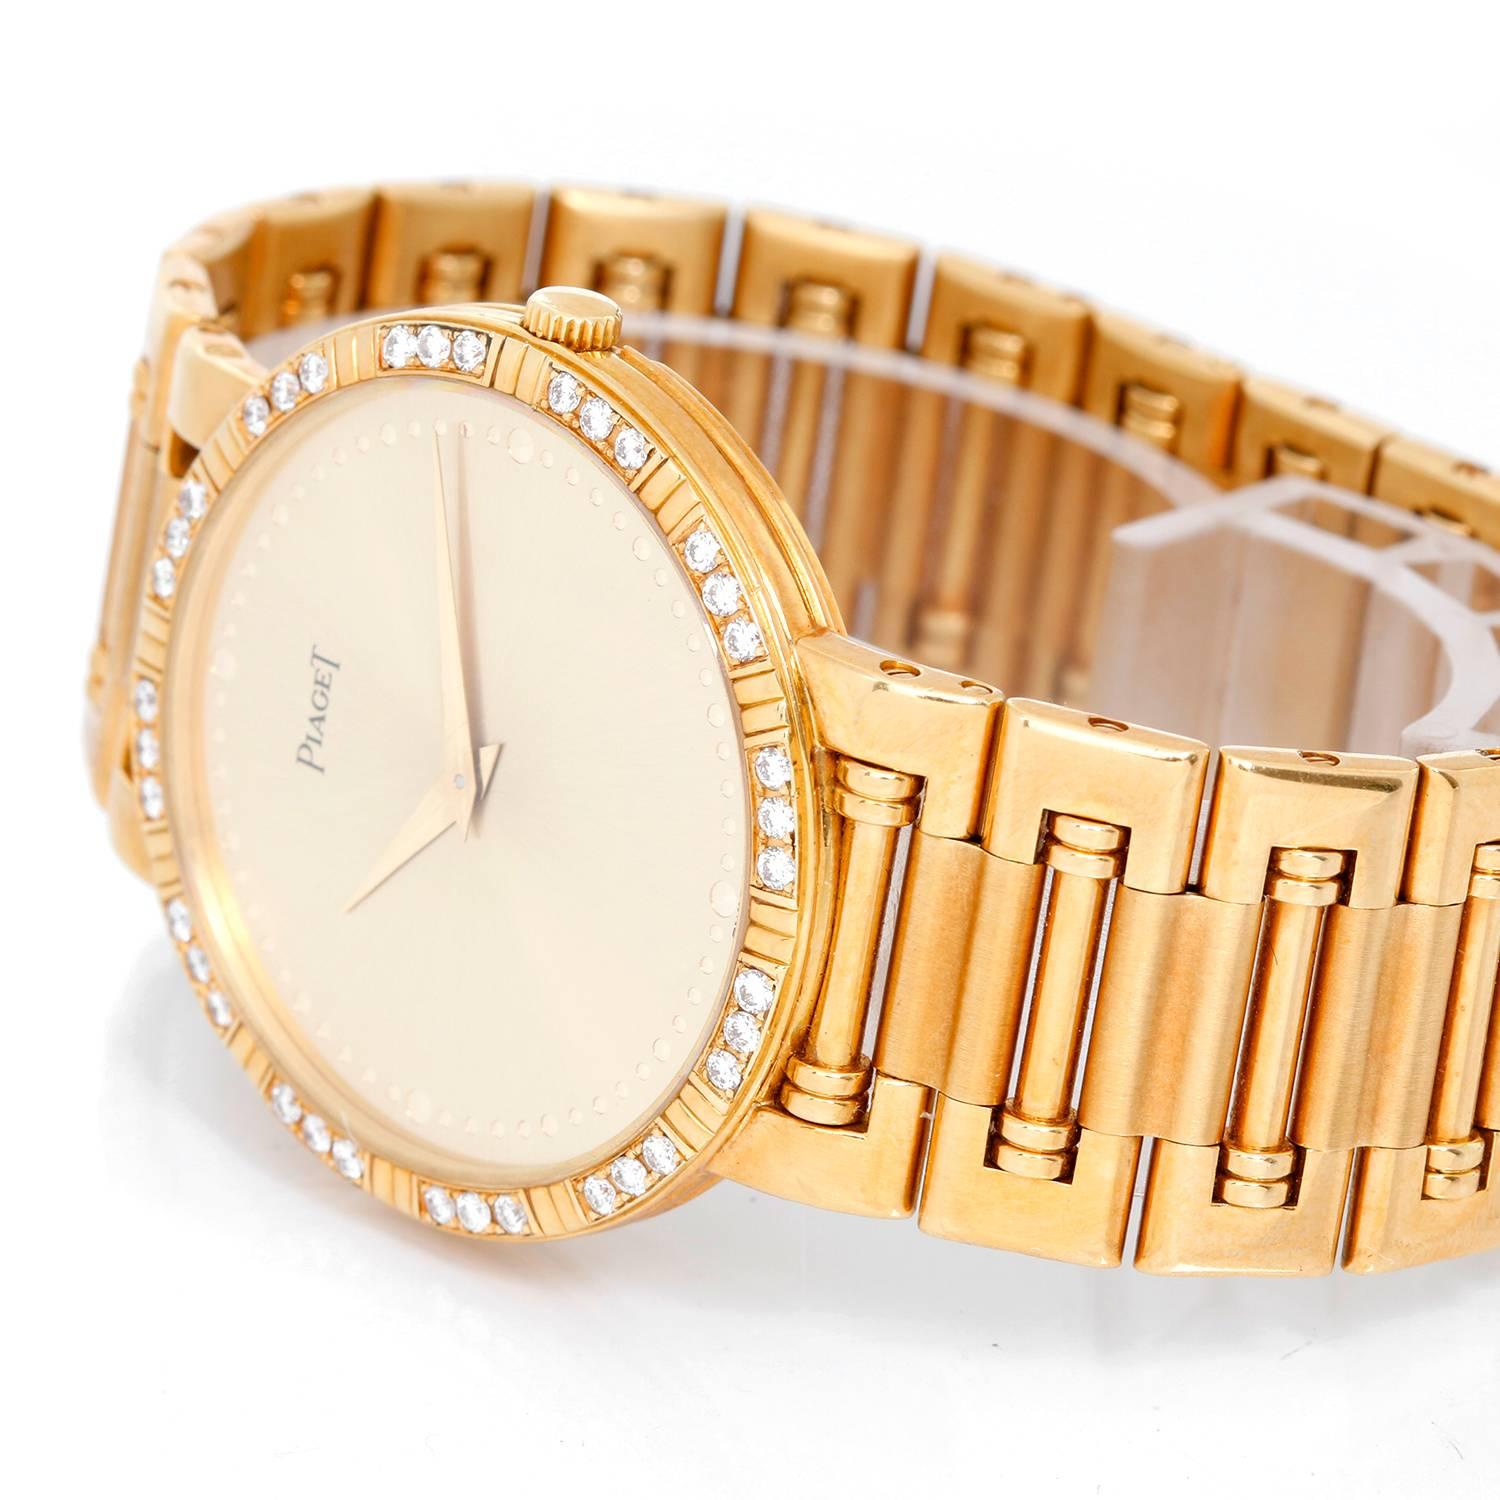 Piaget Dancer 18K Yellow Gold Watch -  Quartz. 18K Yellow Gold ( 31 mm ) with diamond bezel.  Round brilliant cut diamonds weighing 1.03 cts. Near Colorless and VSI Clarity Grade. Gold -tone with dot numerical style. Piaget 18K Yellow Gold bracelet